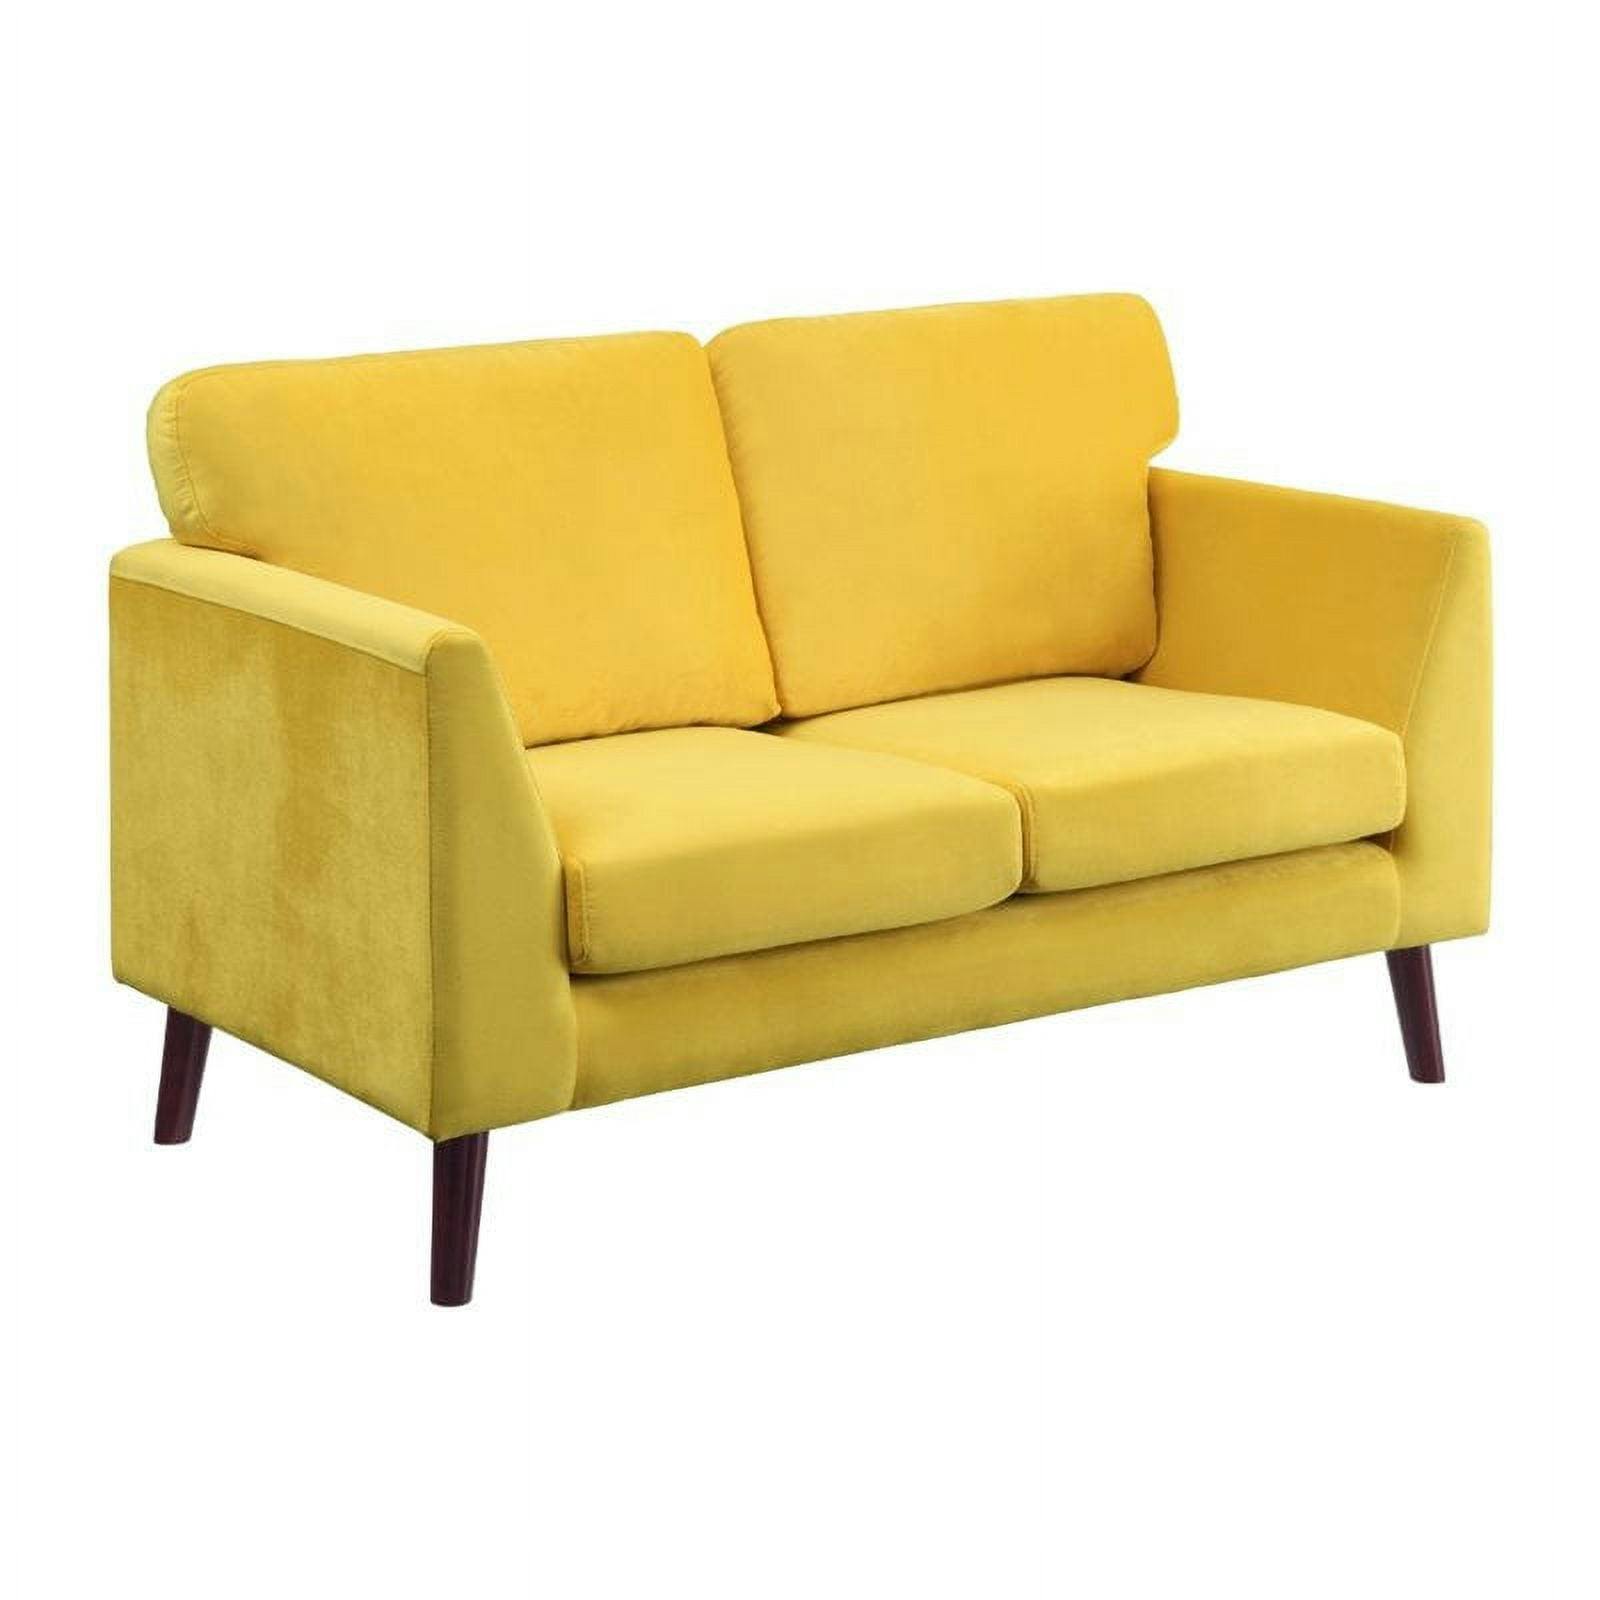 Sunbeam Velvet 58" Solid Wood Loveseat with Pillow Back in Yellow